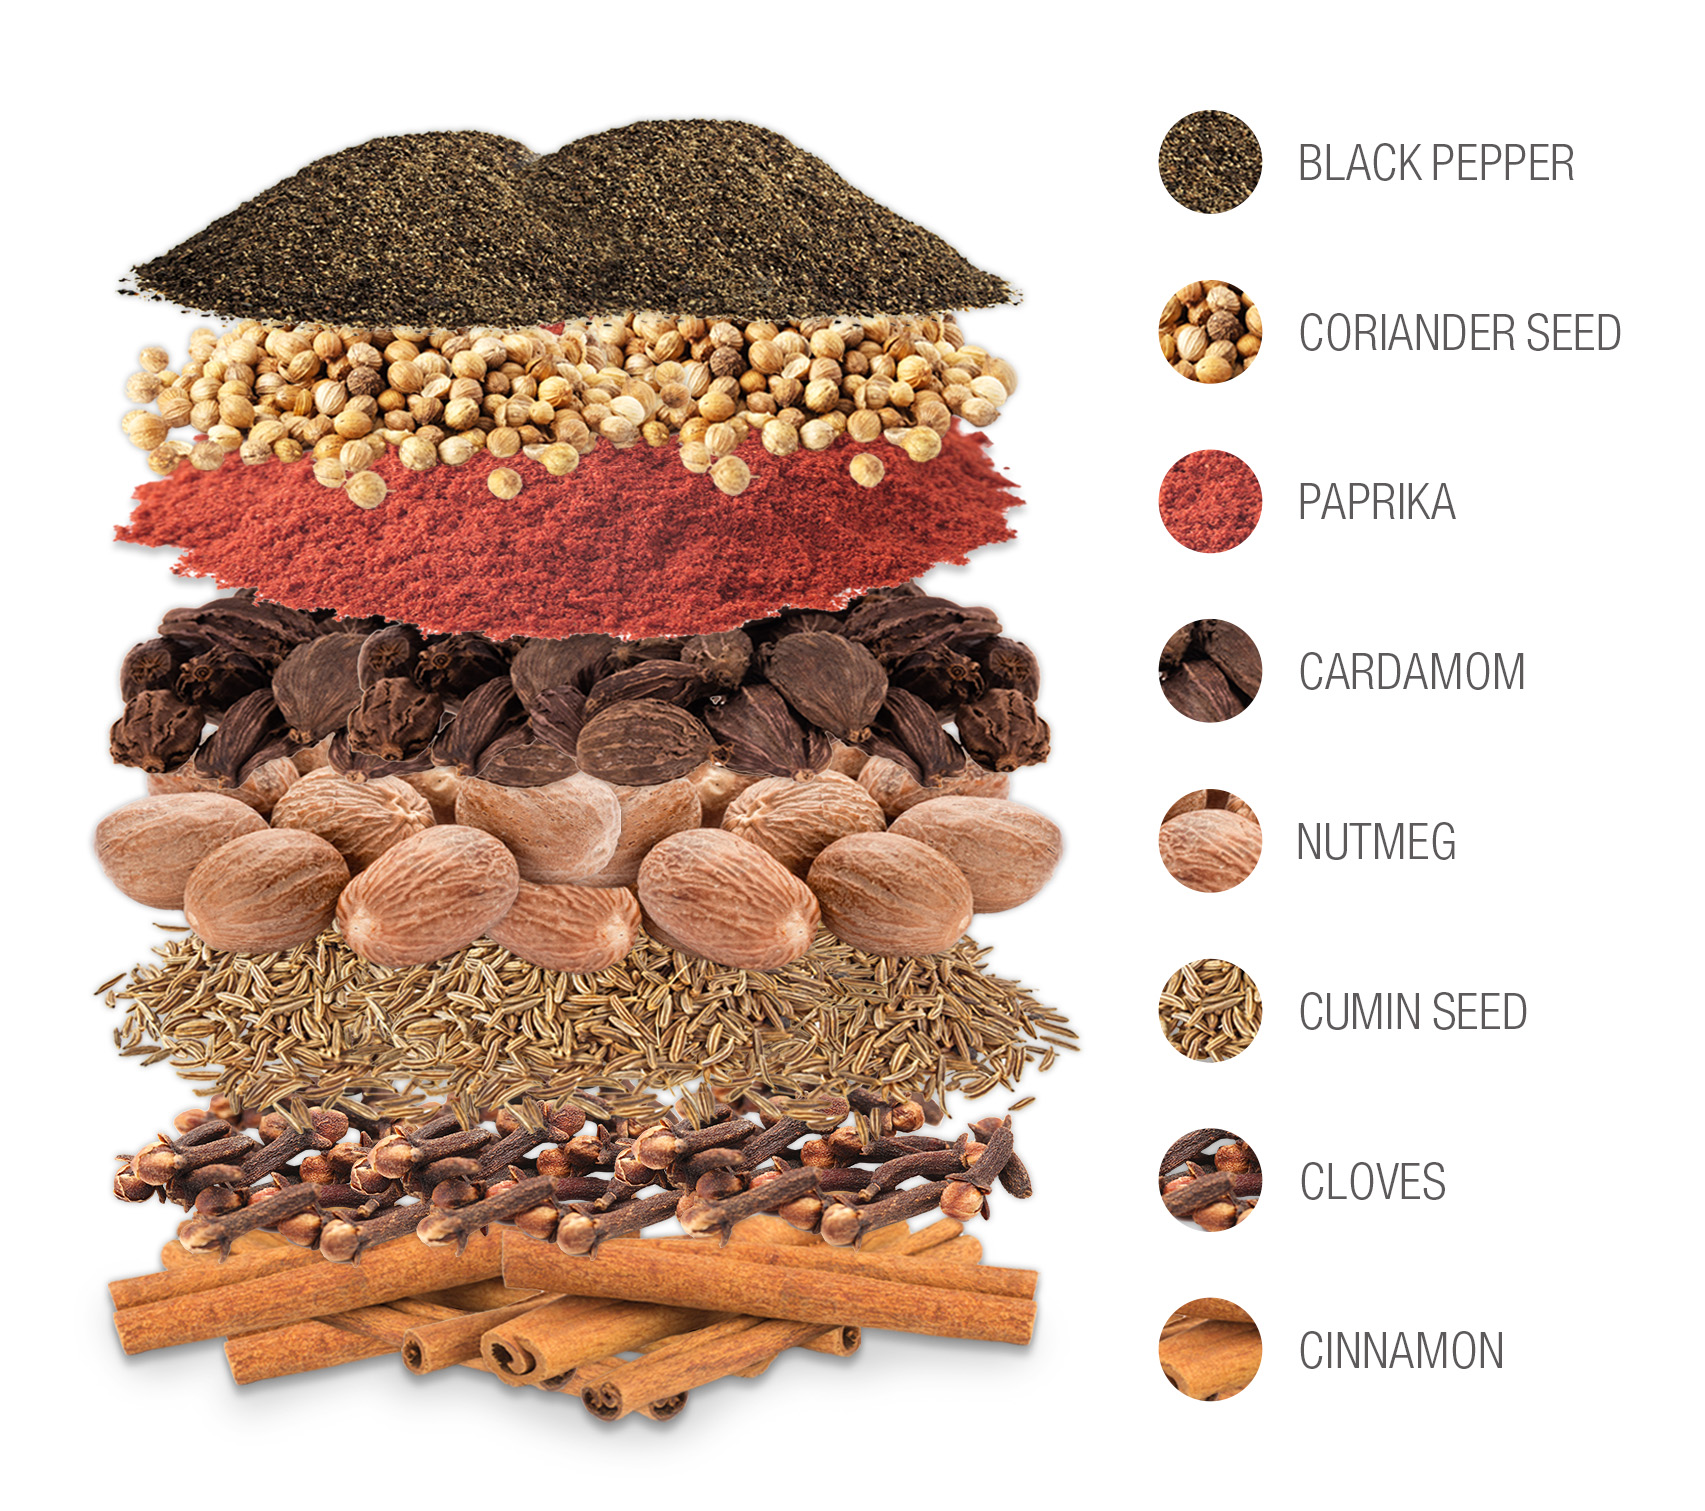 These are the spices used in Asian cooking